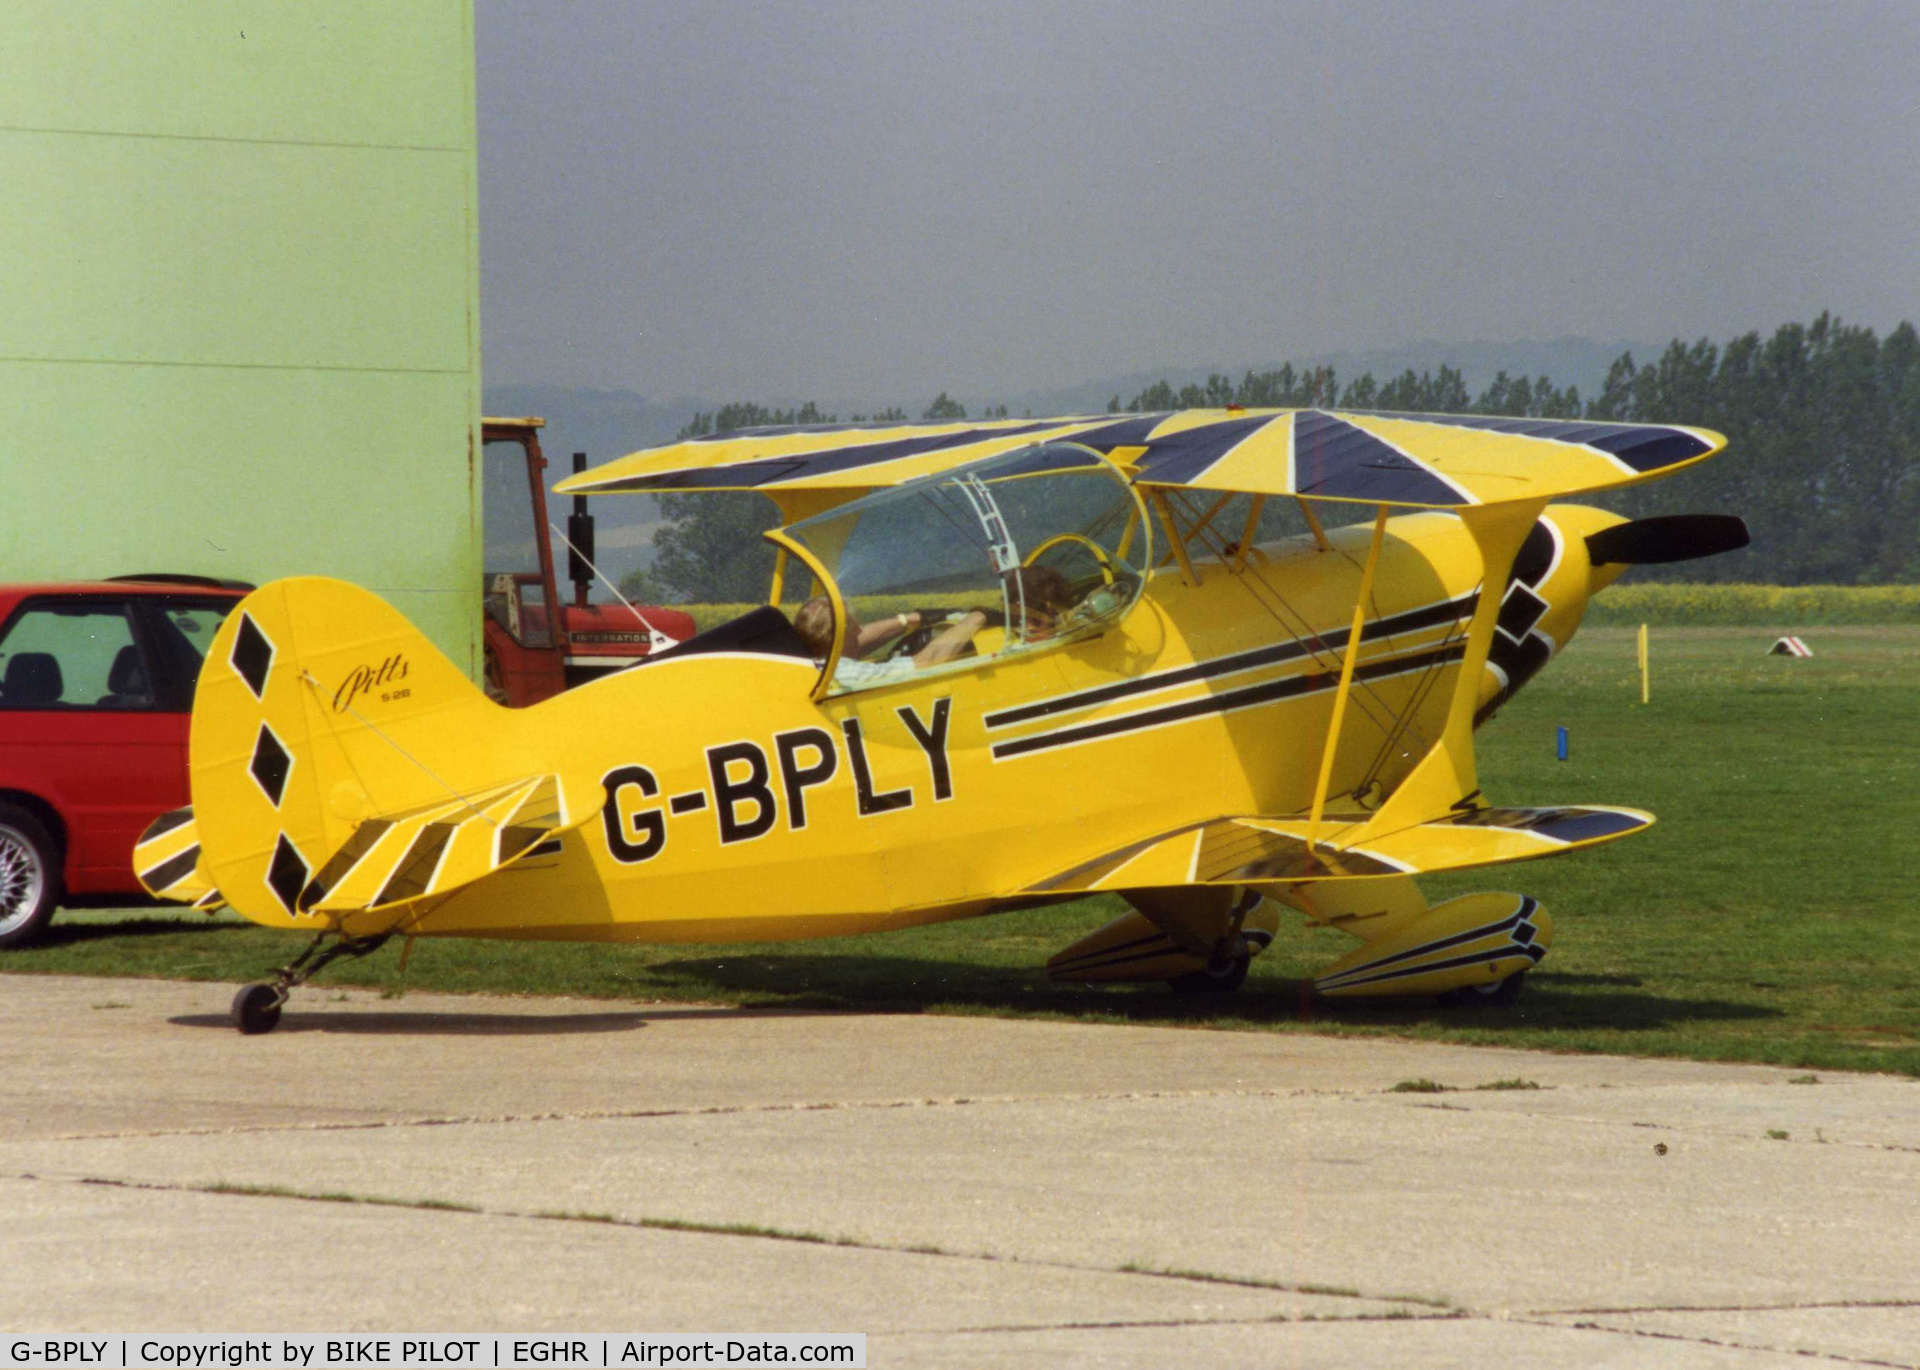 G-BPLY, 1988 Christen Pitts S-2B Special C/N 5149, LIMA YANKEE AT GOODWOOD EGHR IN 1990. TO USA 2009-09-02